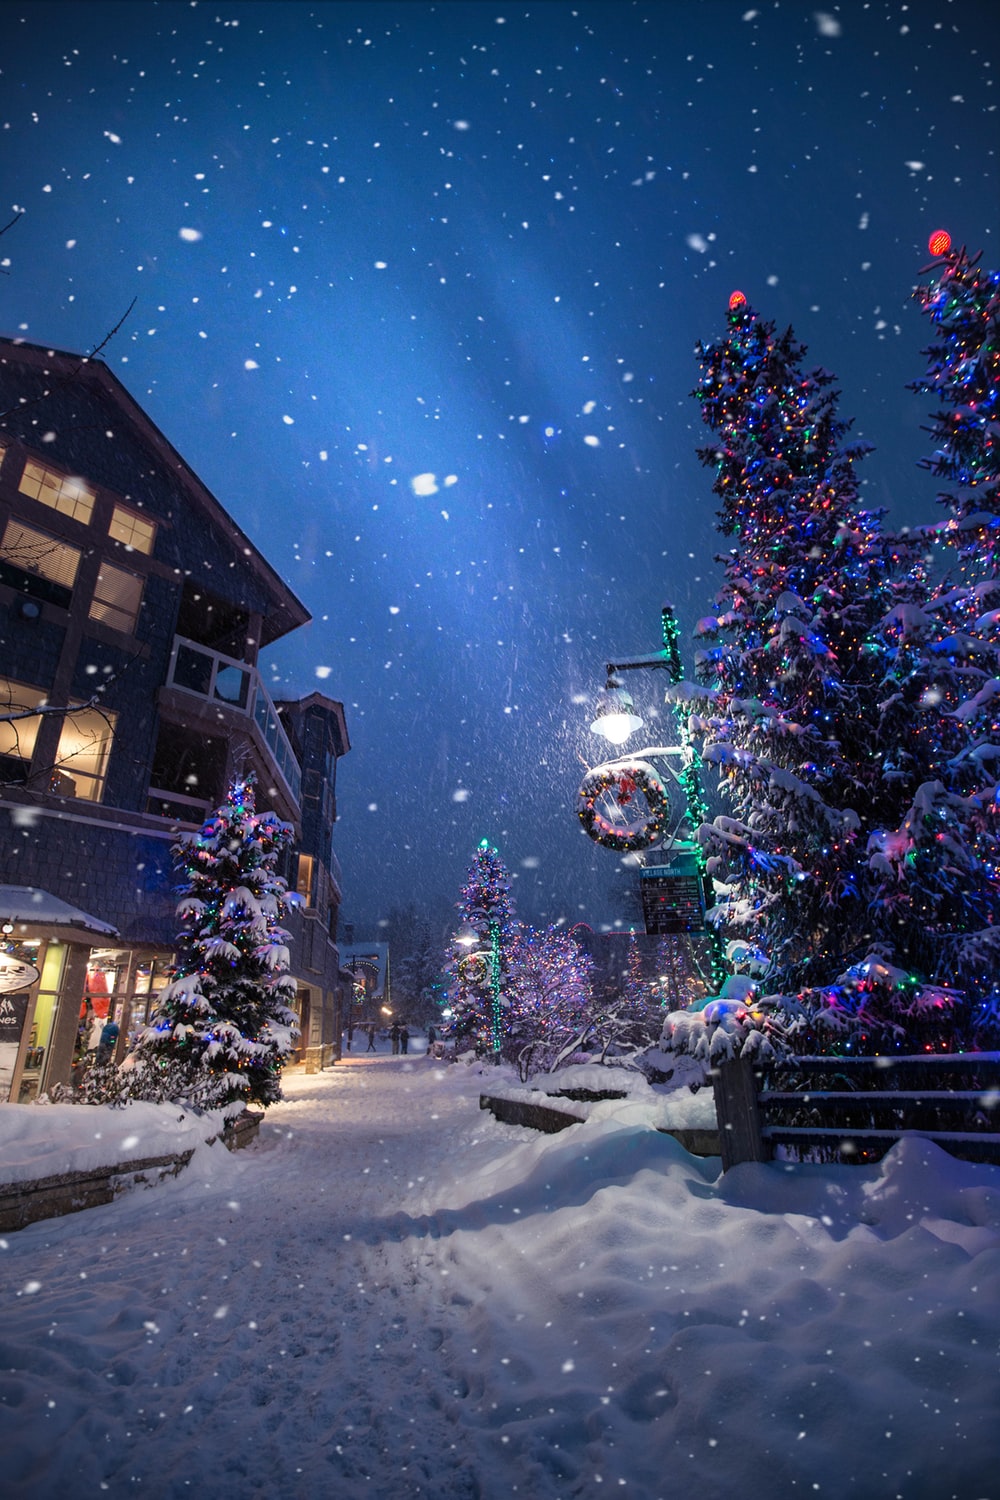 Magic in the Whistler Village HD photo by Roberto Nickson